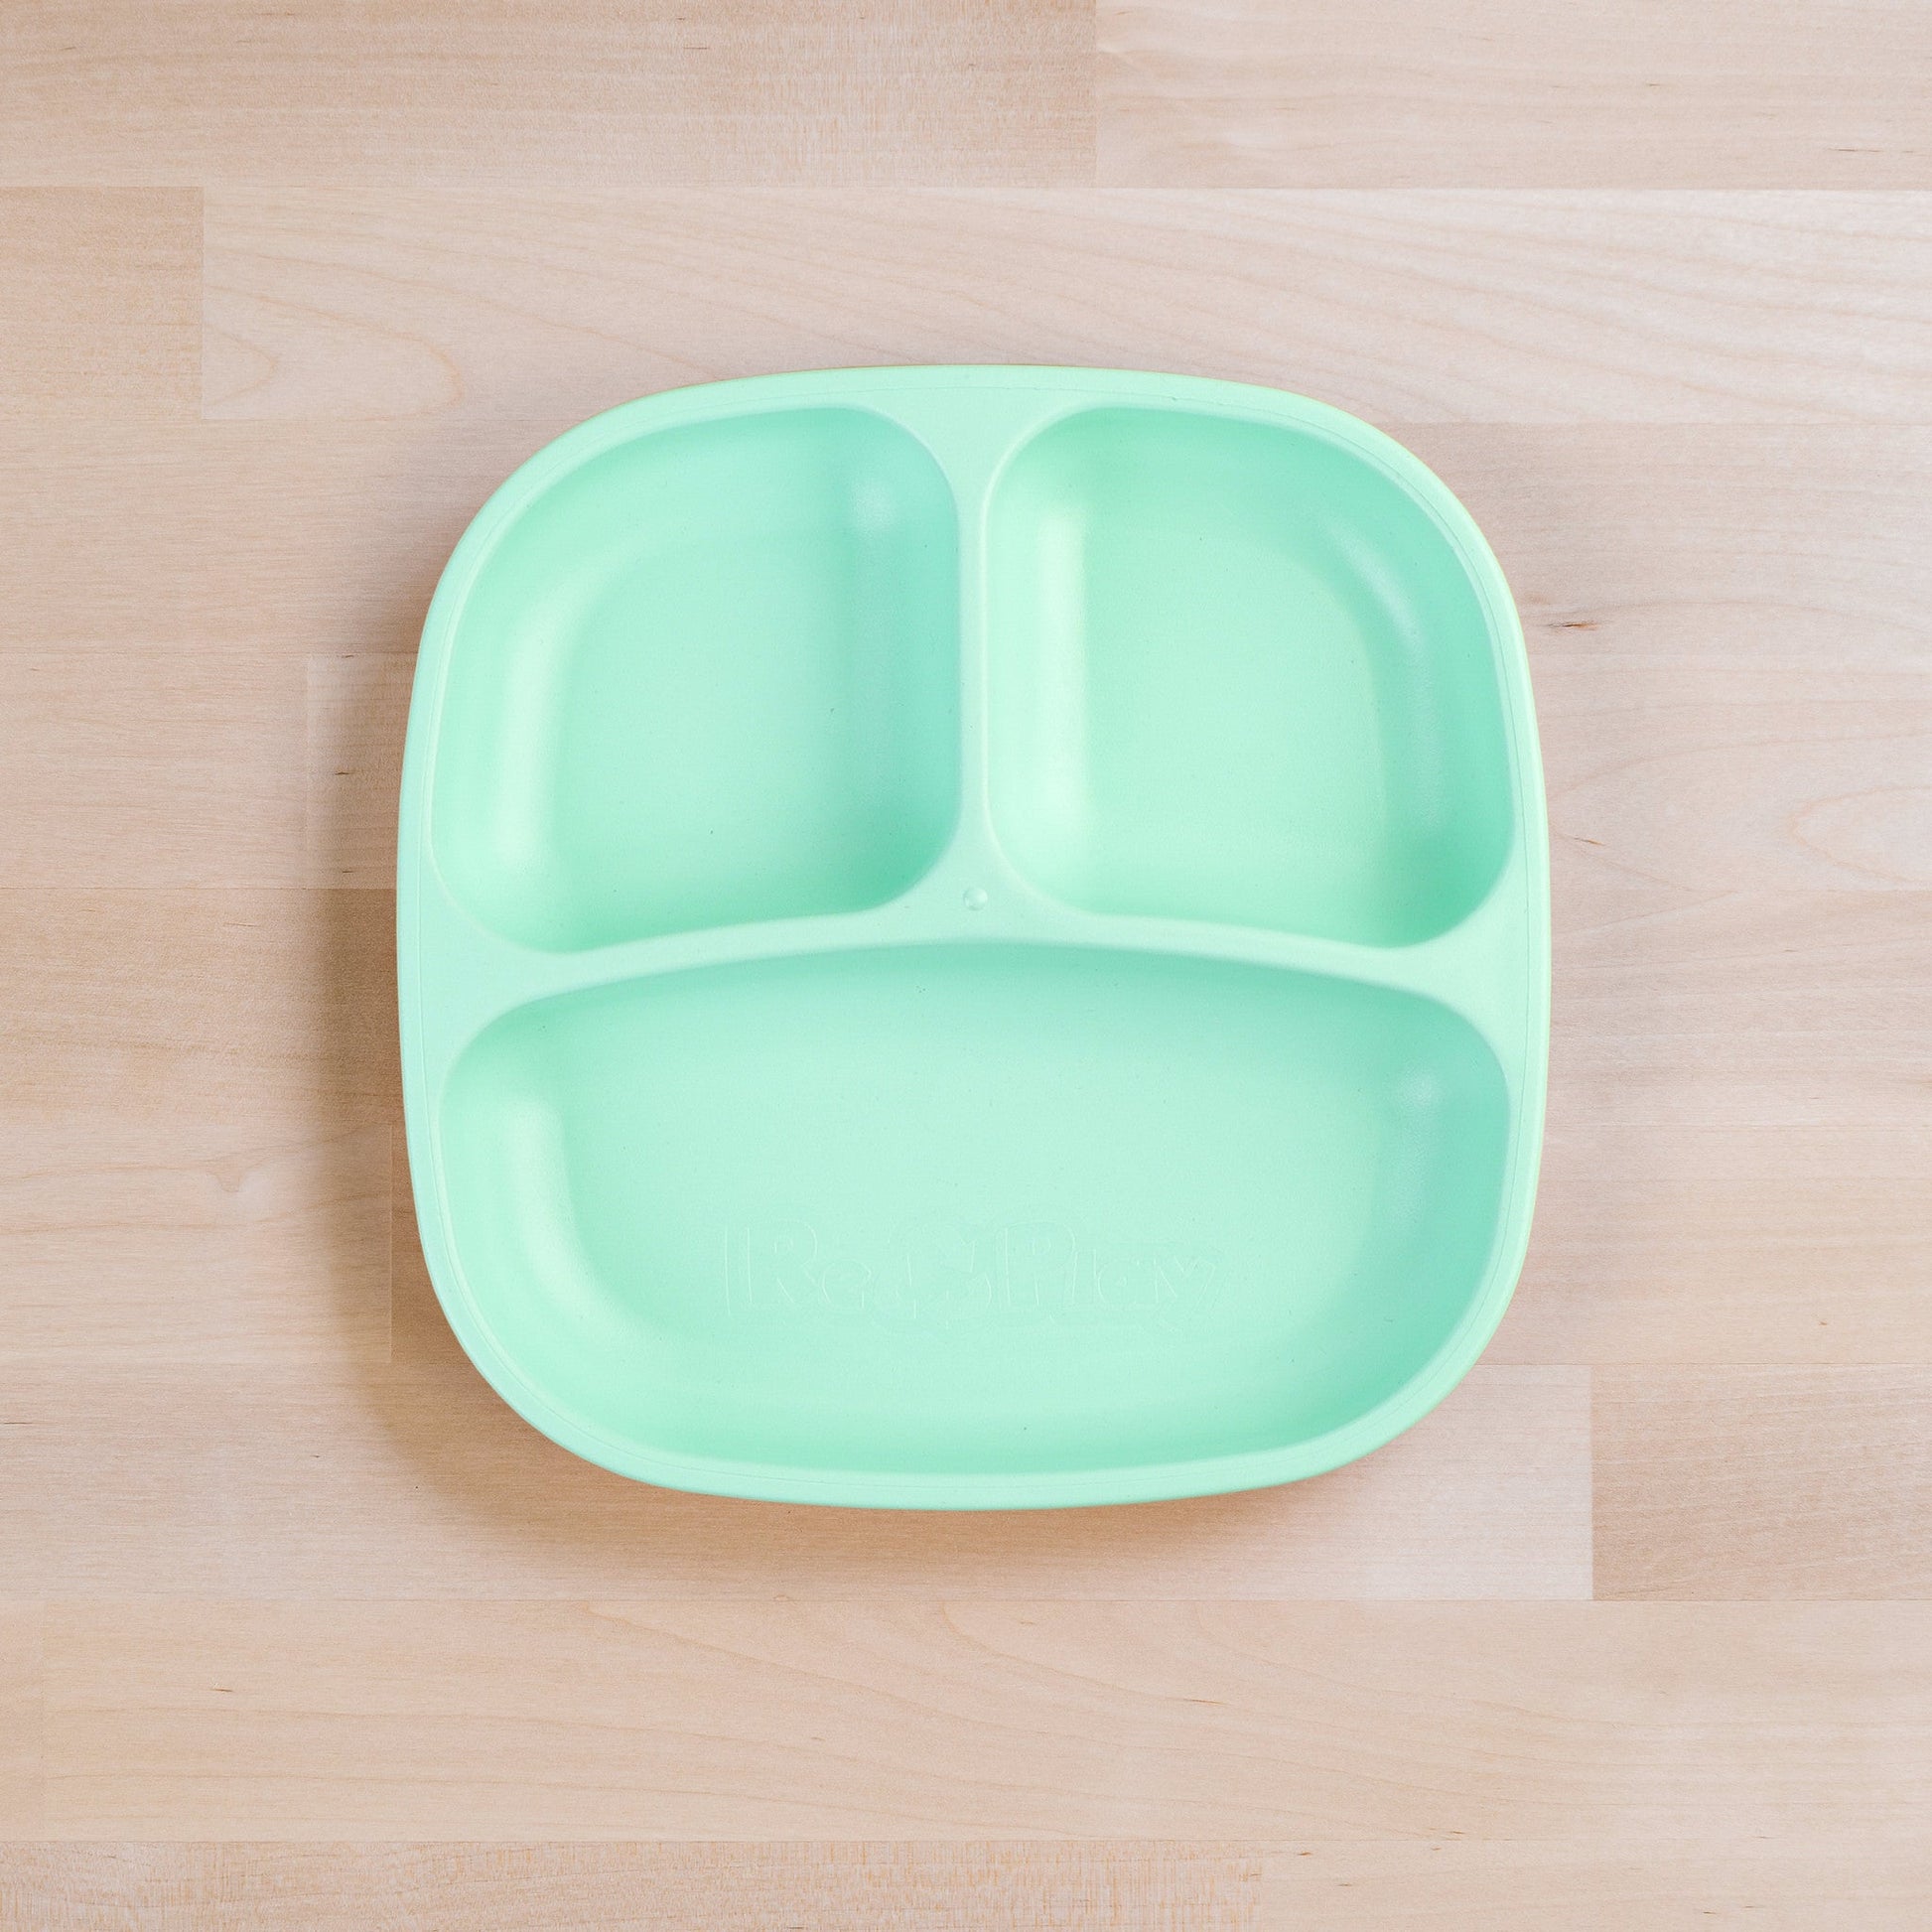 Re-Play Divided Plate 7" plate in Mint from Bear & Moo